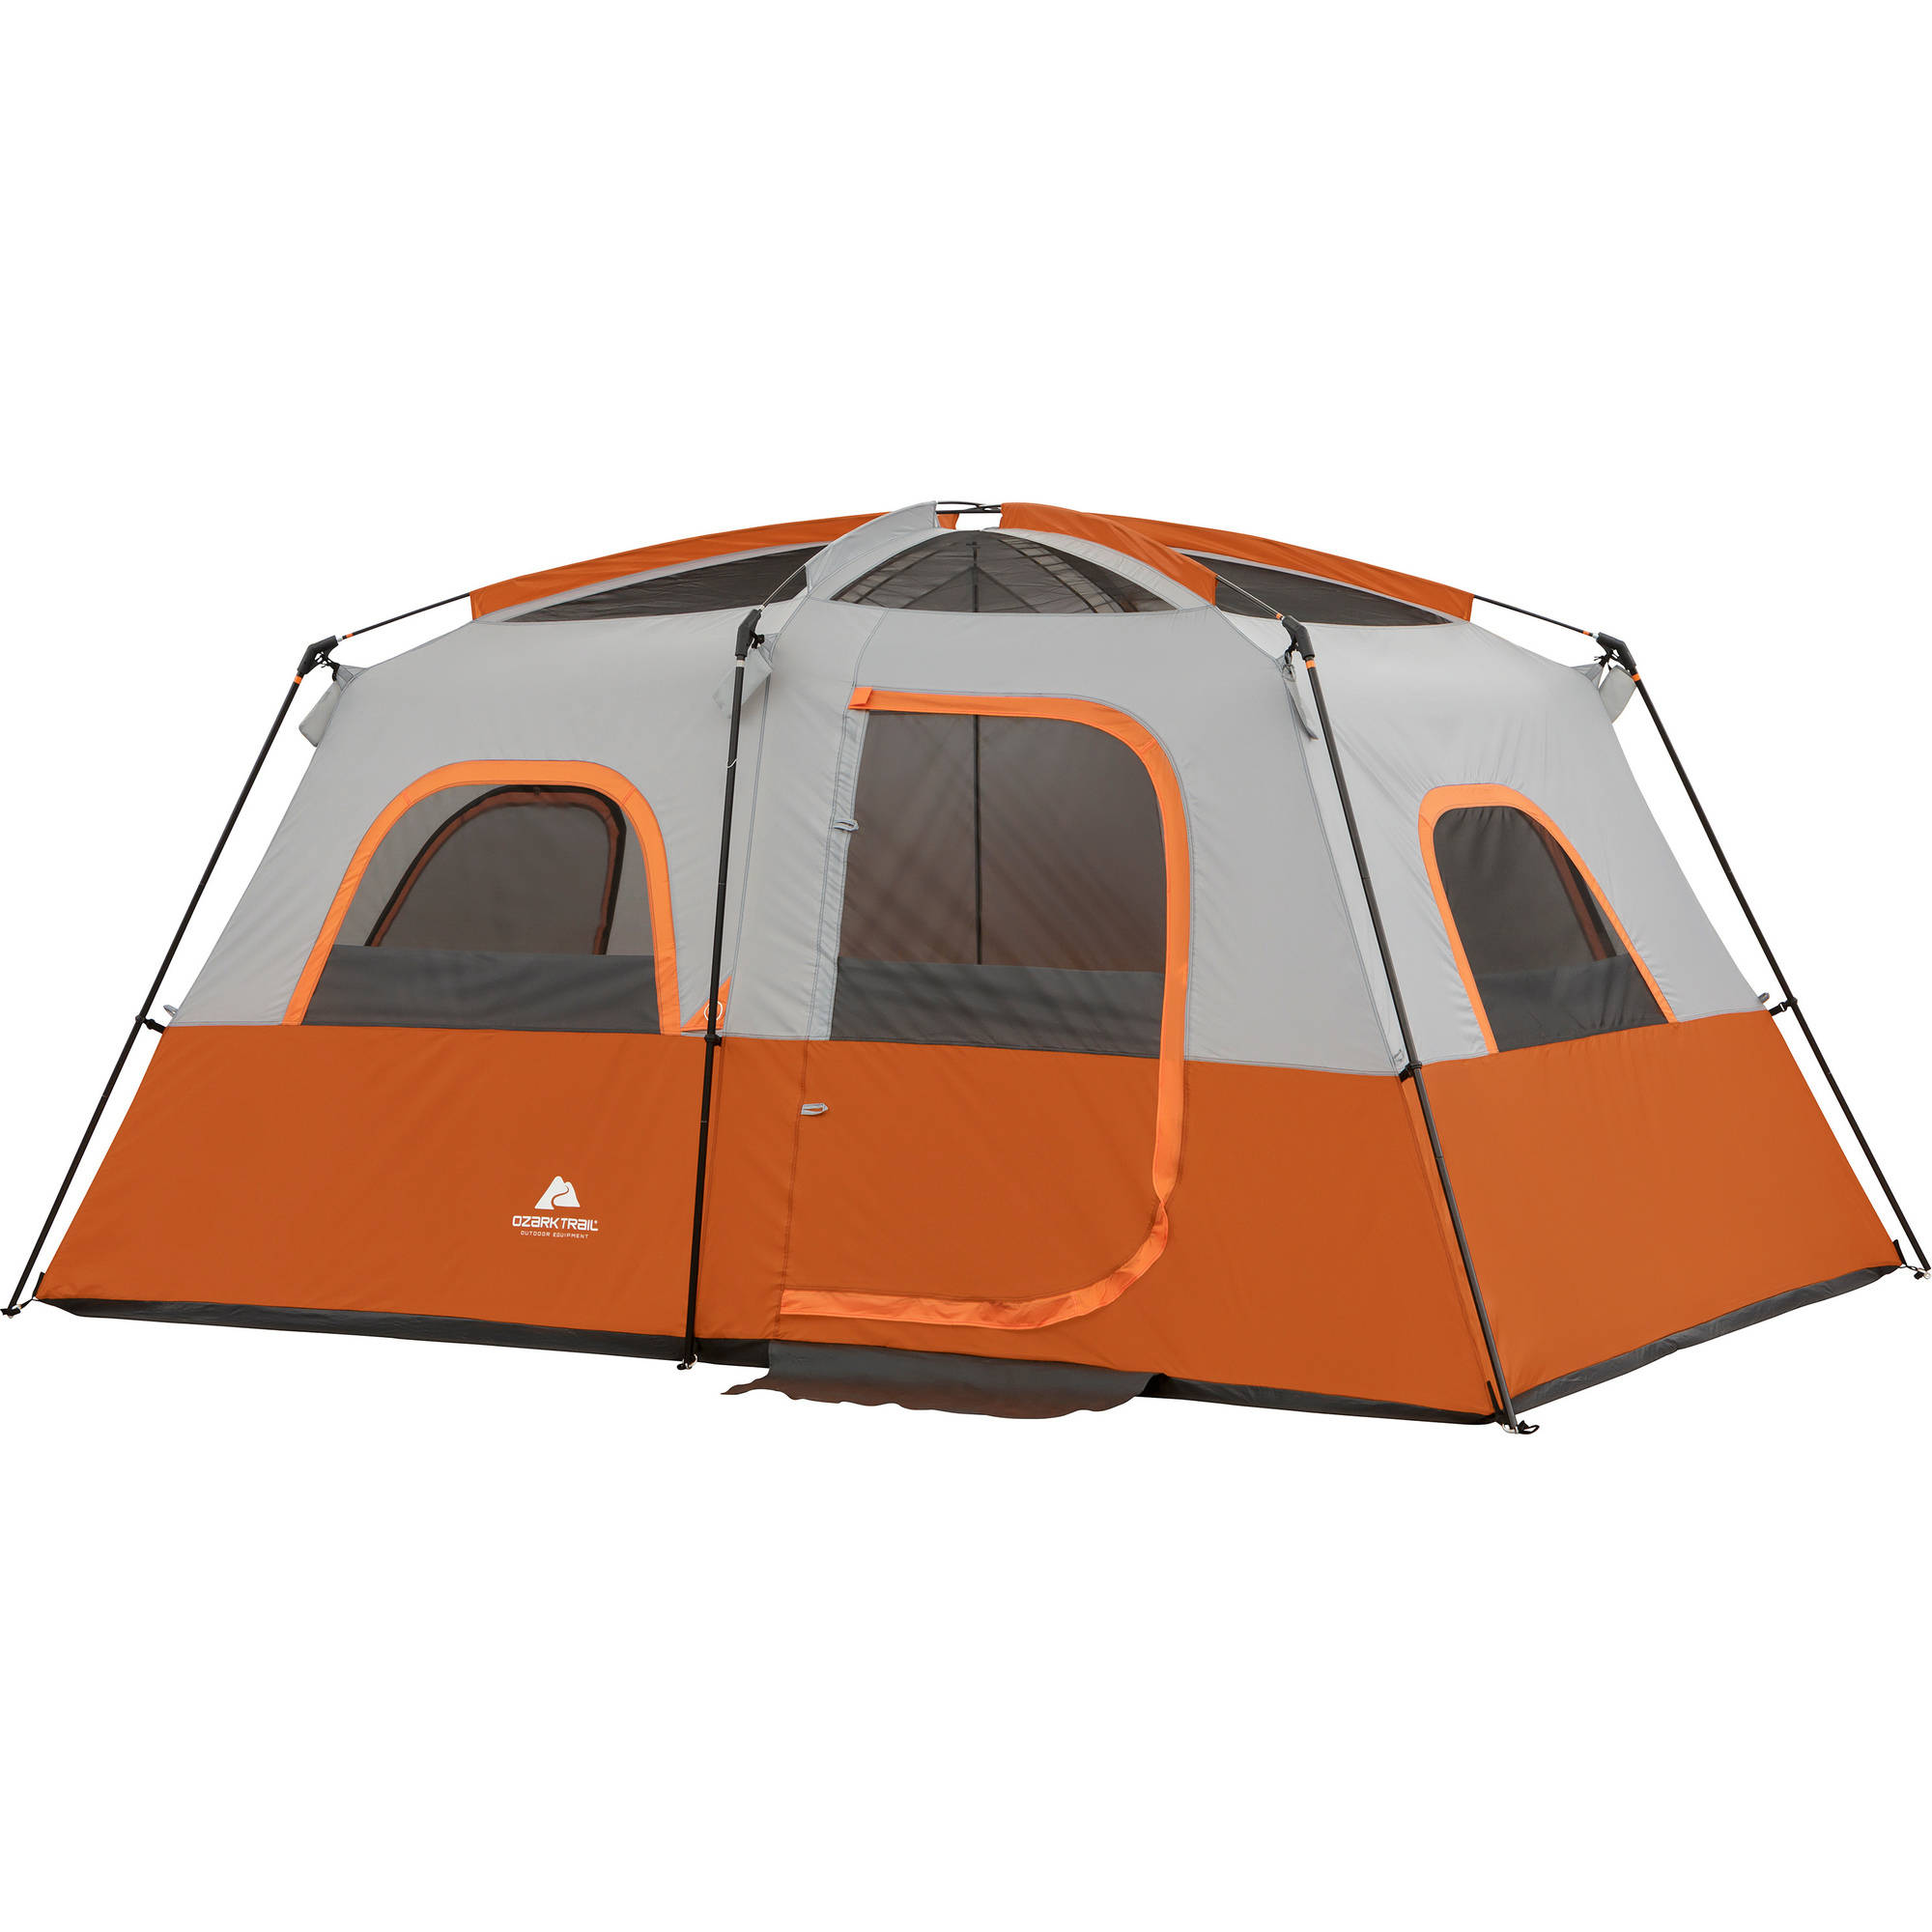 Ozark Trail 13' x 9' with 76"H Family Cabin Tent, Sleeps 8 - image 2 of 8